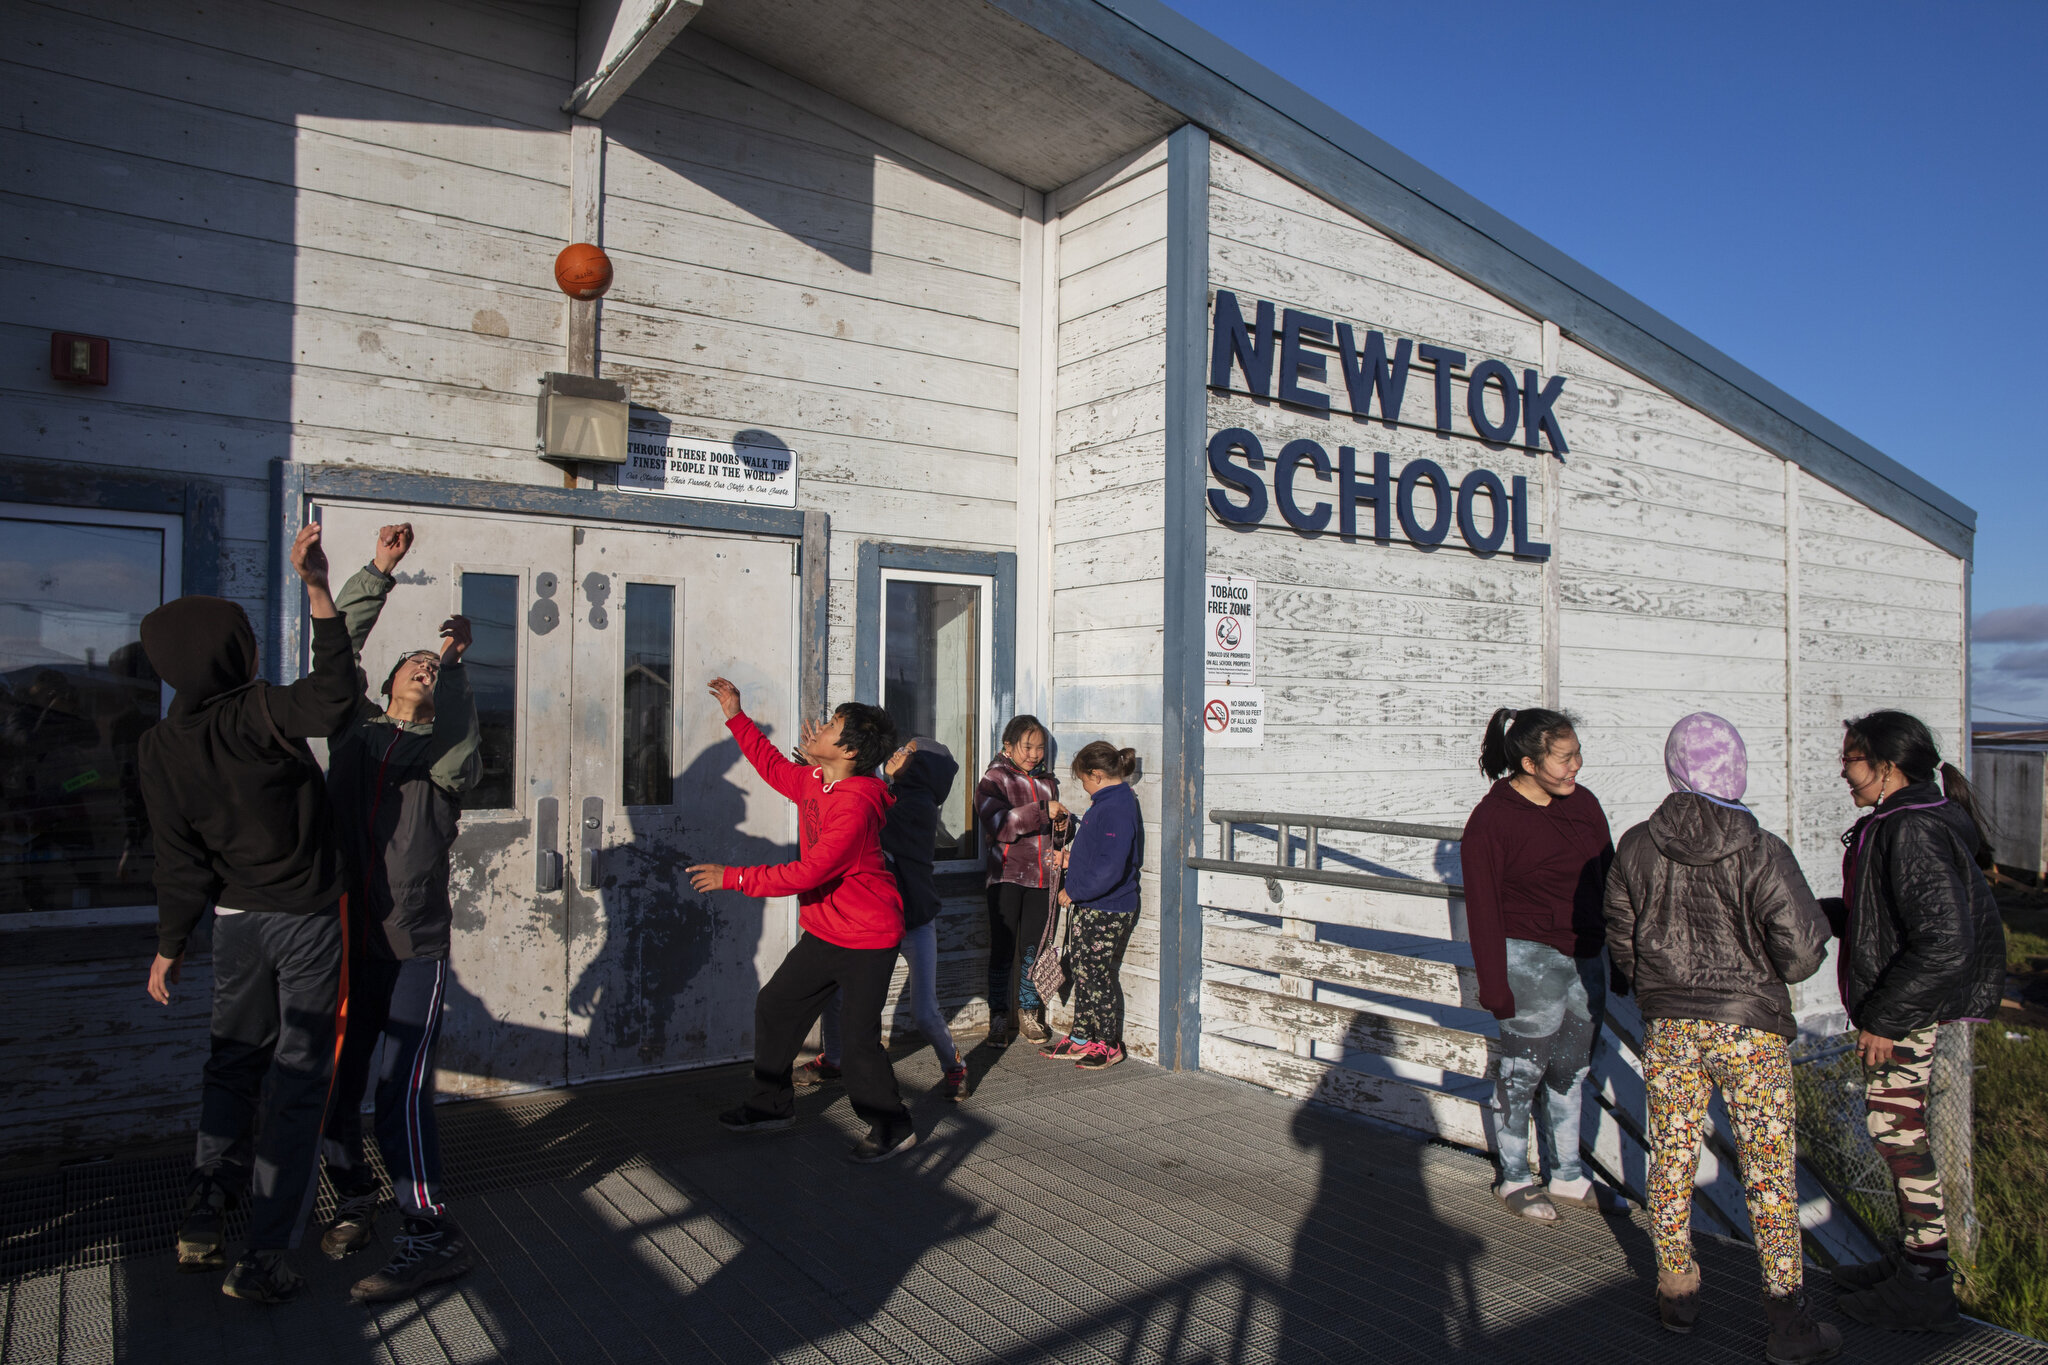  The Newtok School will be one of the first schools in the USA to shutter as a result of climate change. The building is sinking, and was a main motivator for the village to relocate permanently. June 2, 2019. The Yupik village of Newtok, Alaska, pop